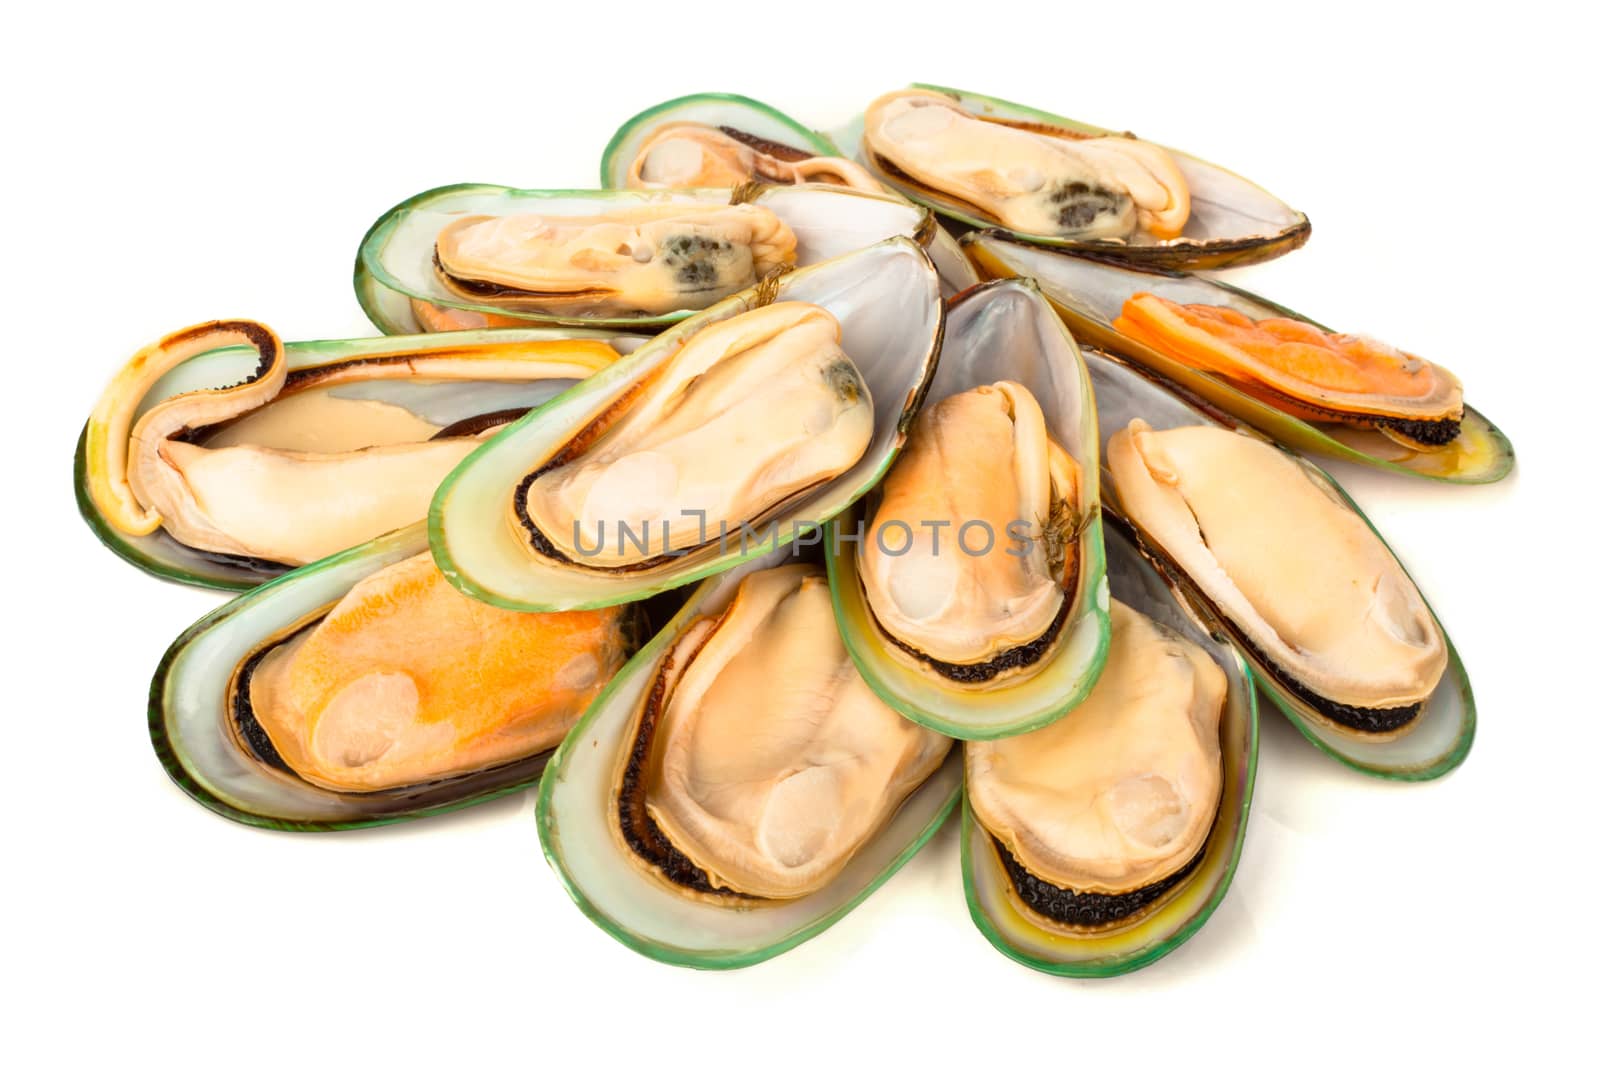 Female New Zealand greenshell mussels studio isolated on white background